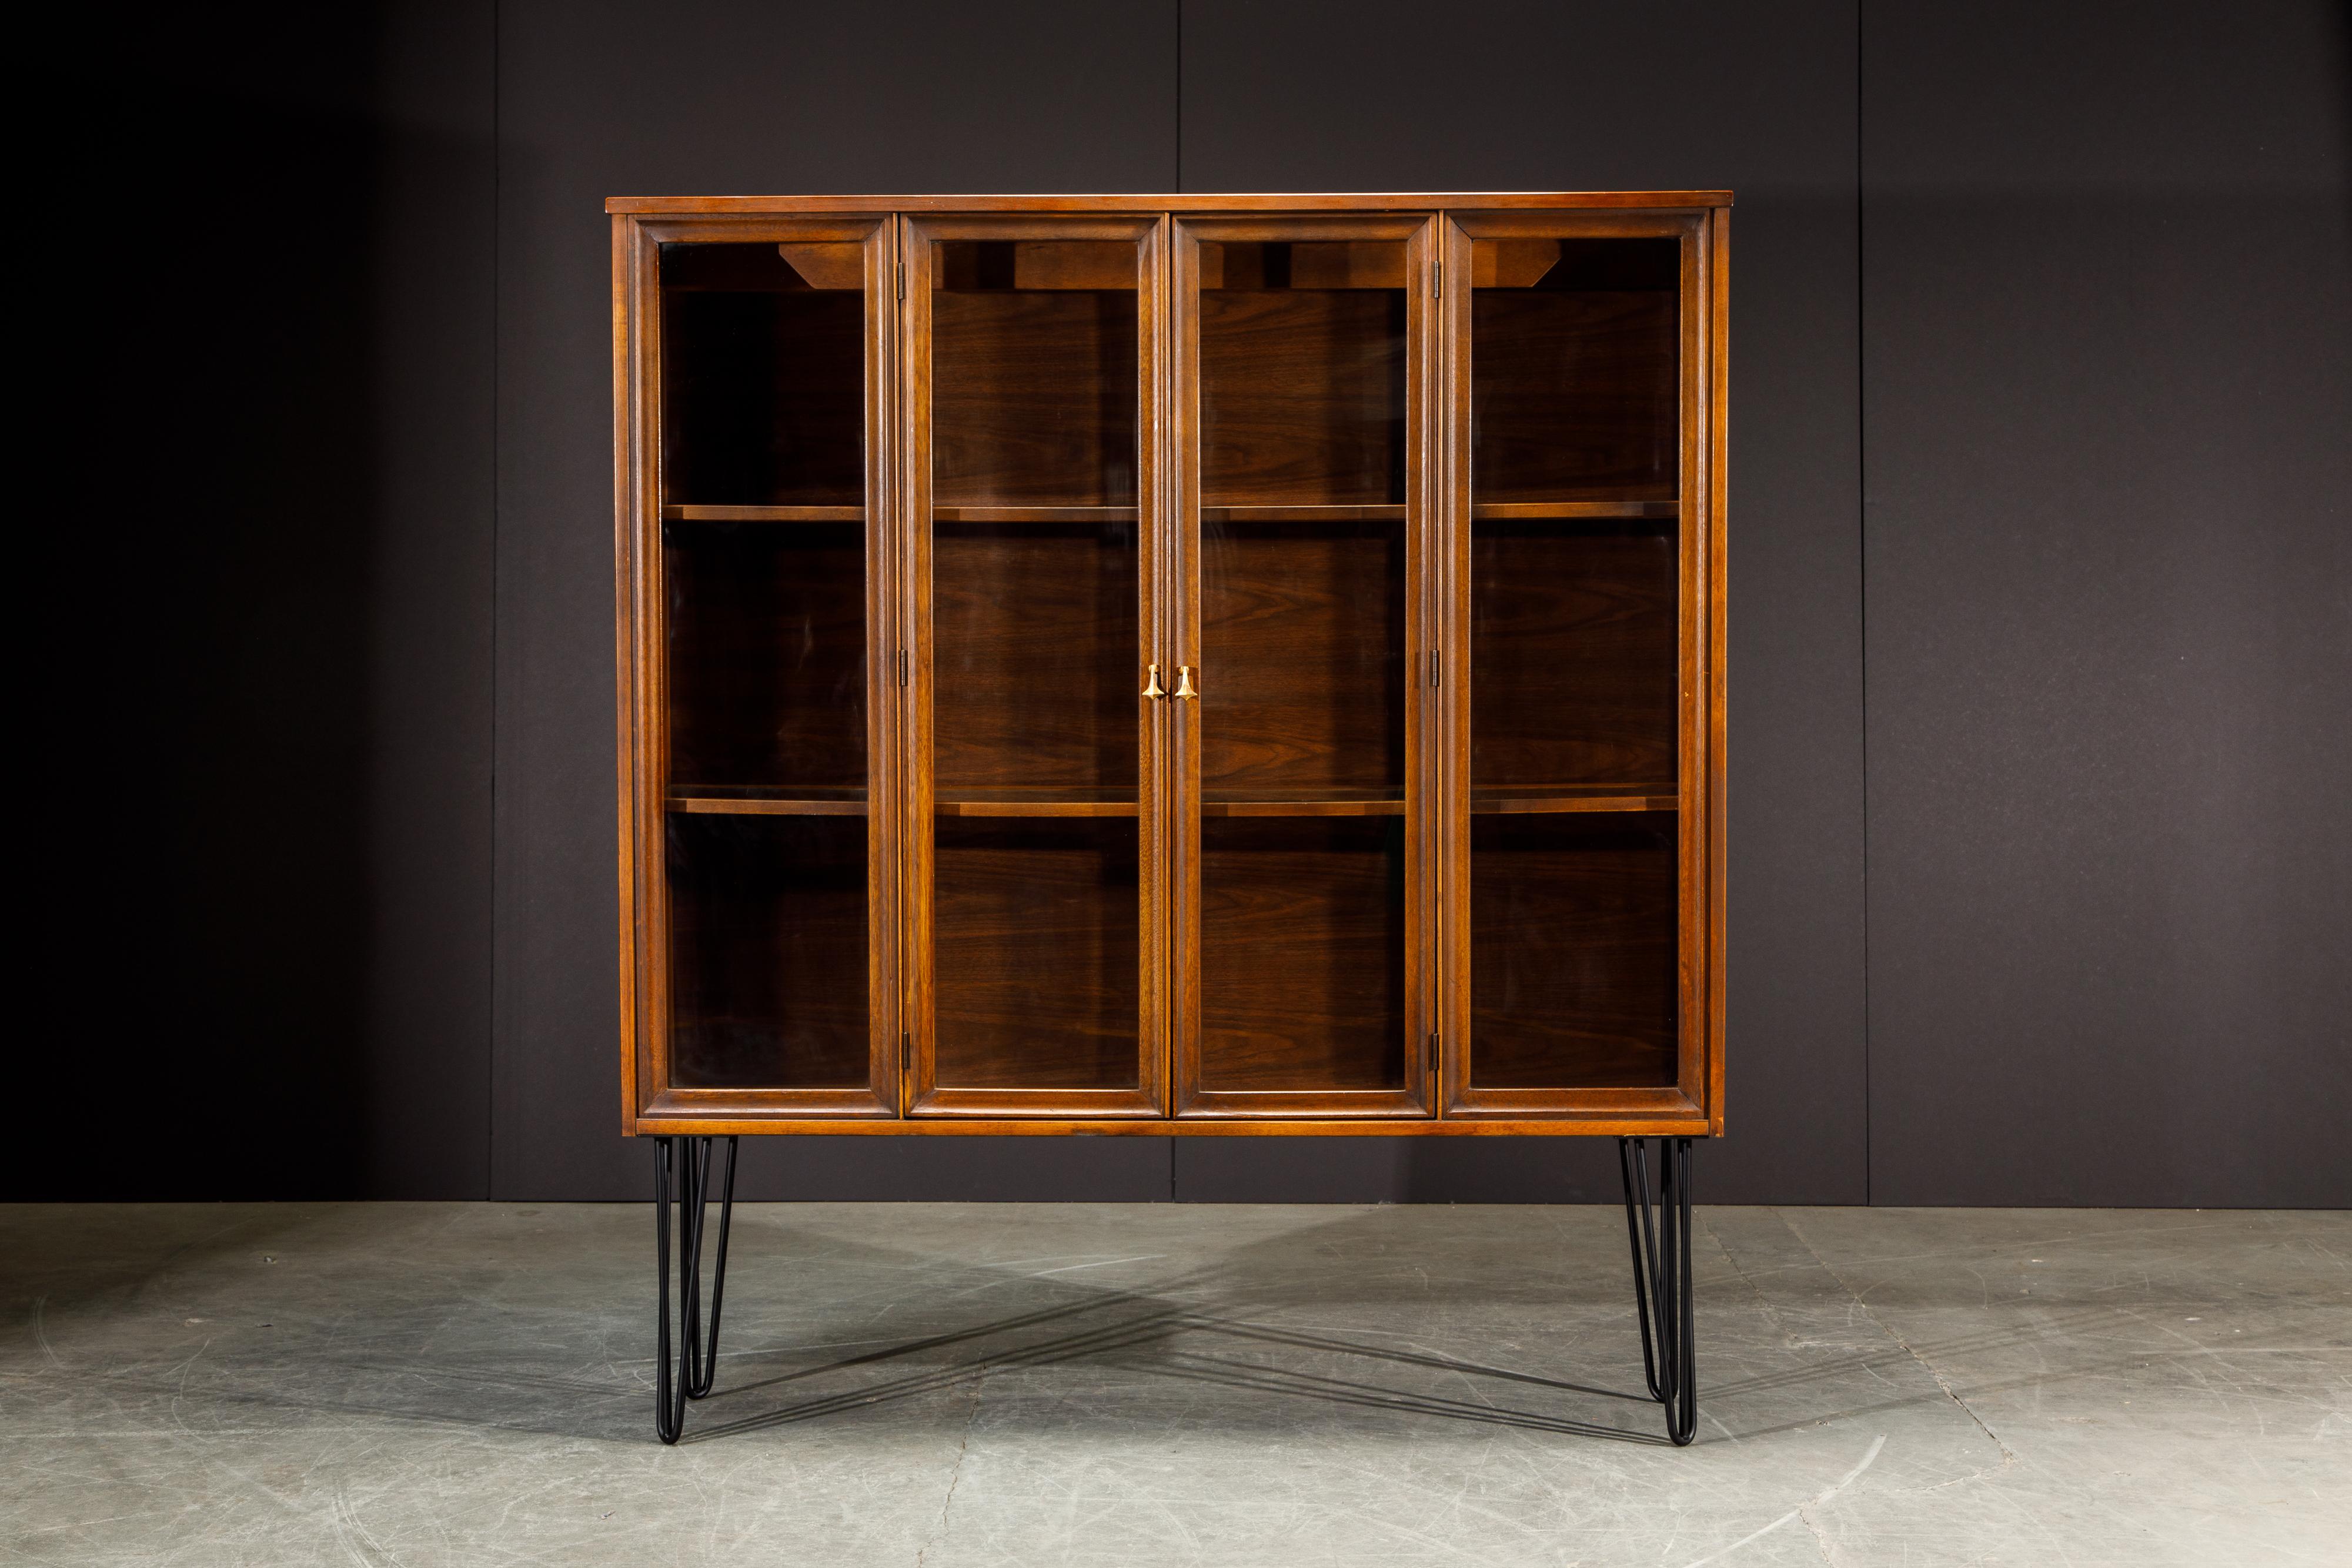 This 1960s 'Brasilia' by Broyhill Premiere display cabinet features gorgeous brass pulls in its signature Brazilia shape with two walnut and glass cabinet doors that open up to interior shelf space and illuminated interior. New hairpin legs were